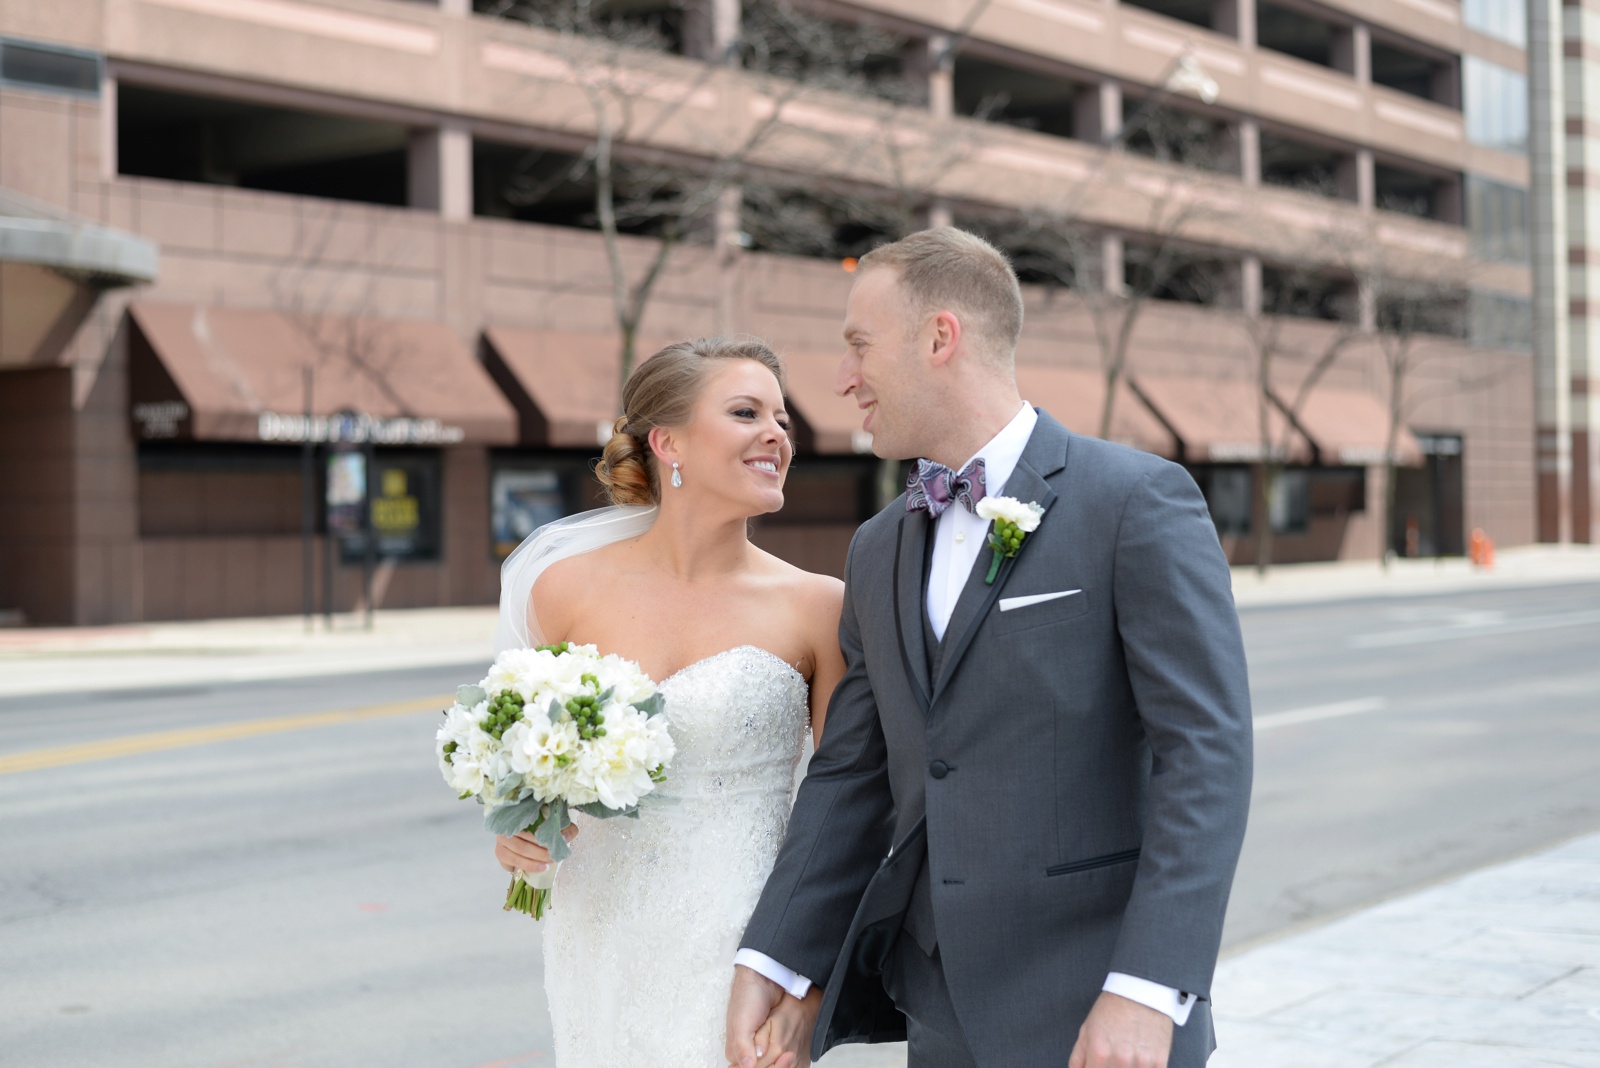 the-bride-and-groom-are-walking-down-a-street-in-columbus